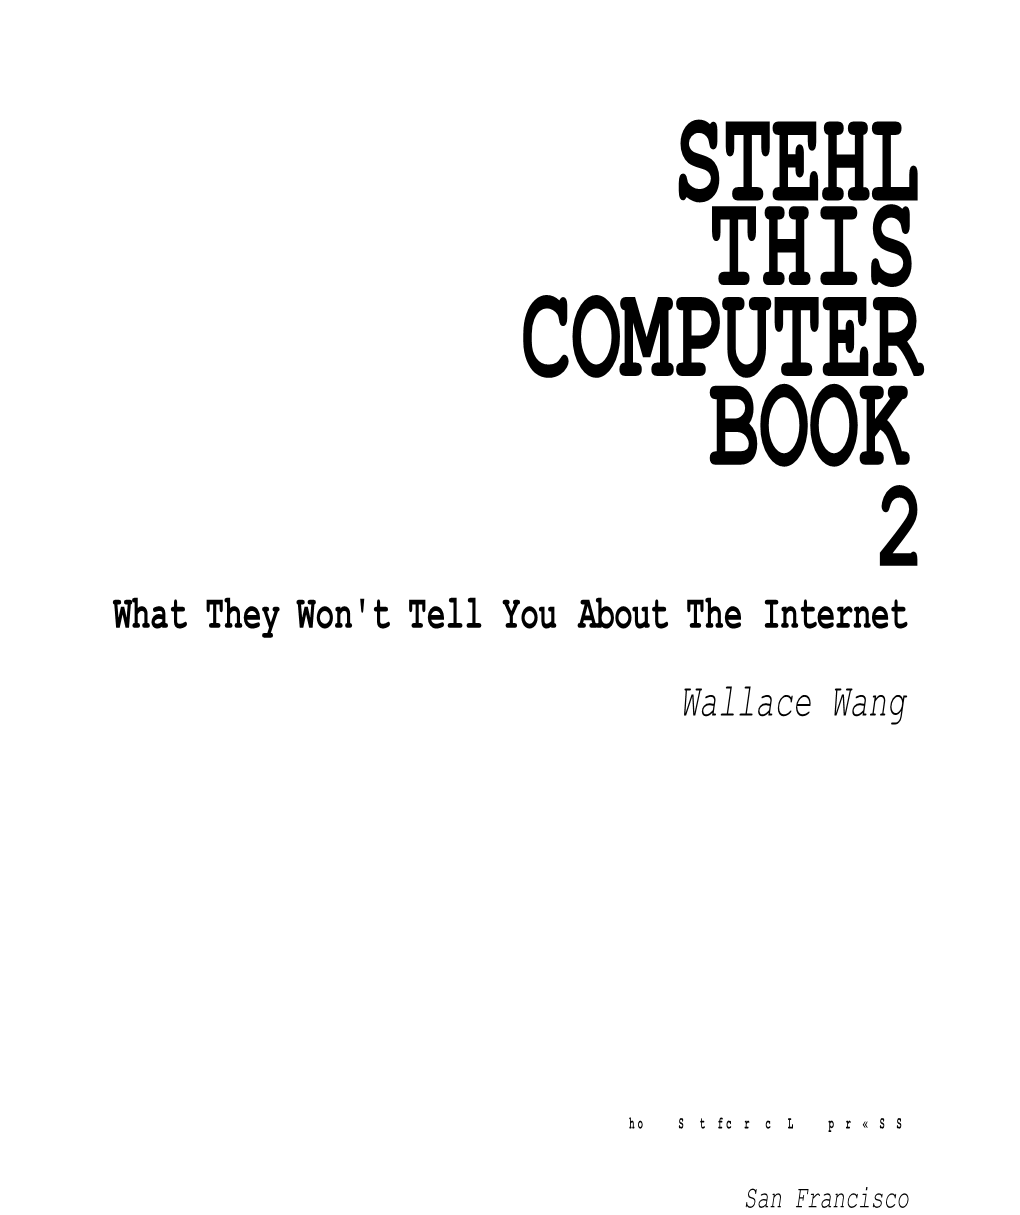 STEHL THIS COMPUTER BOOK 2 What They Won't Tell You About the Internet Wallace Wang